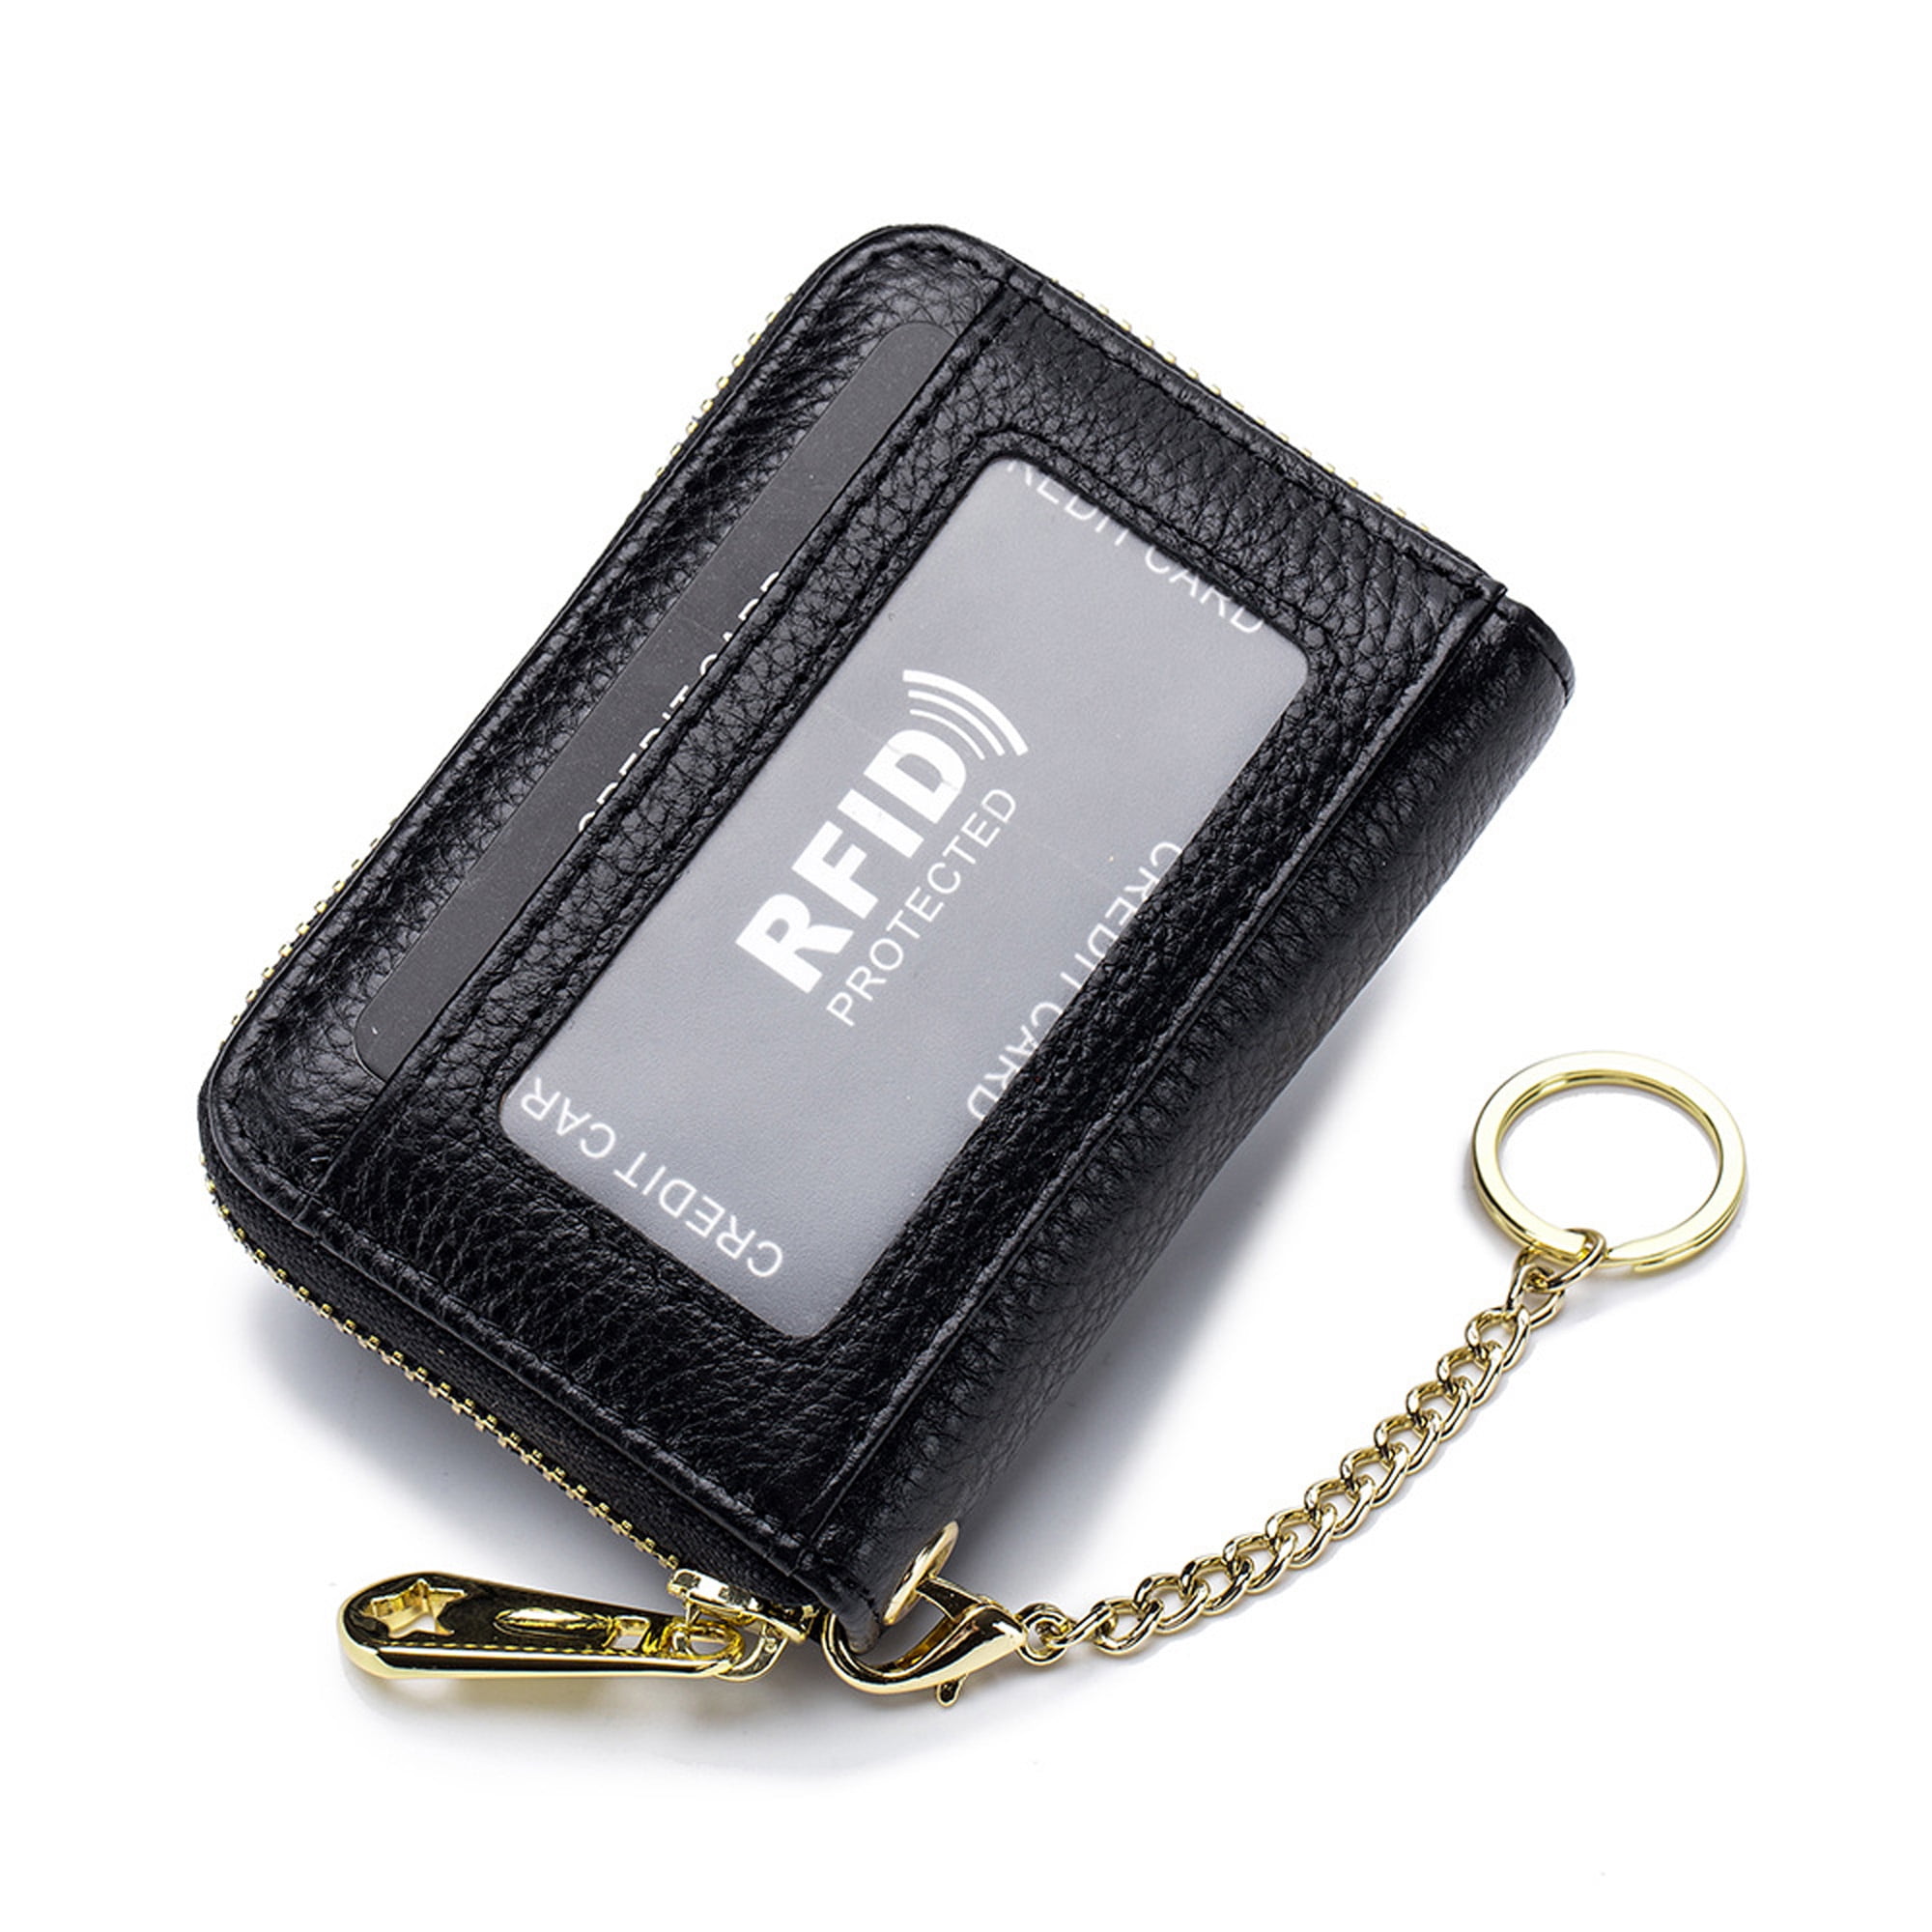 Mens Leather Coin Purse Change Pouch Wallet Zipper Card Holder with Key  Chain | eBay